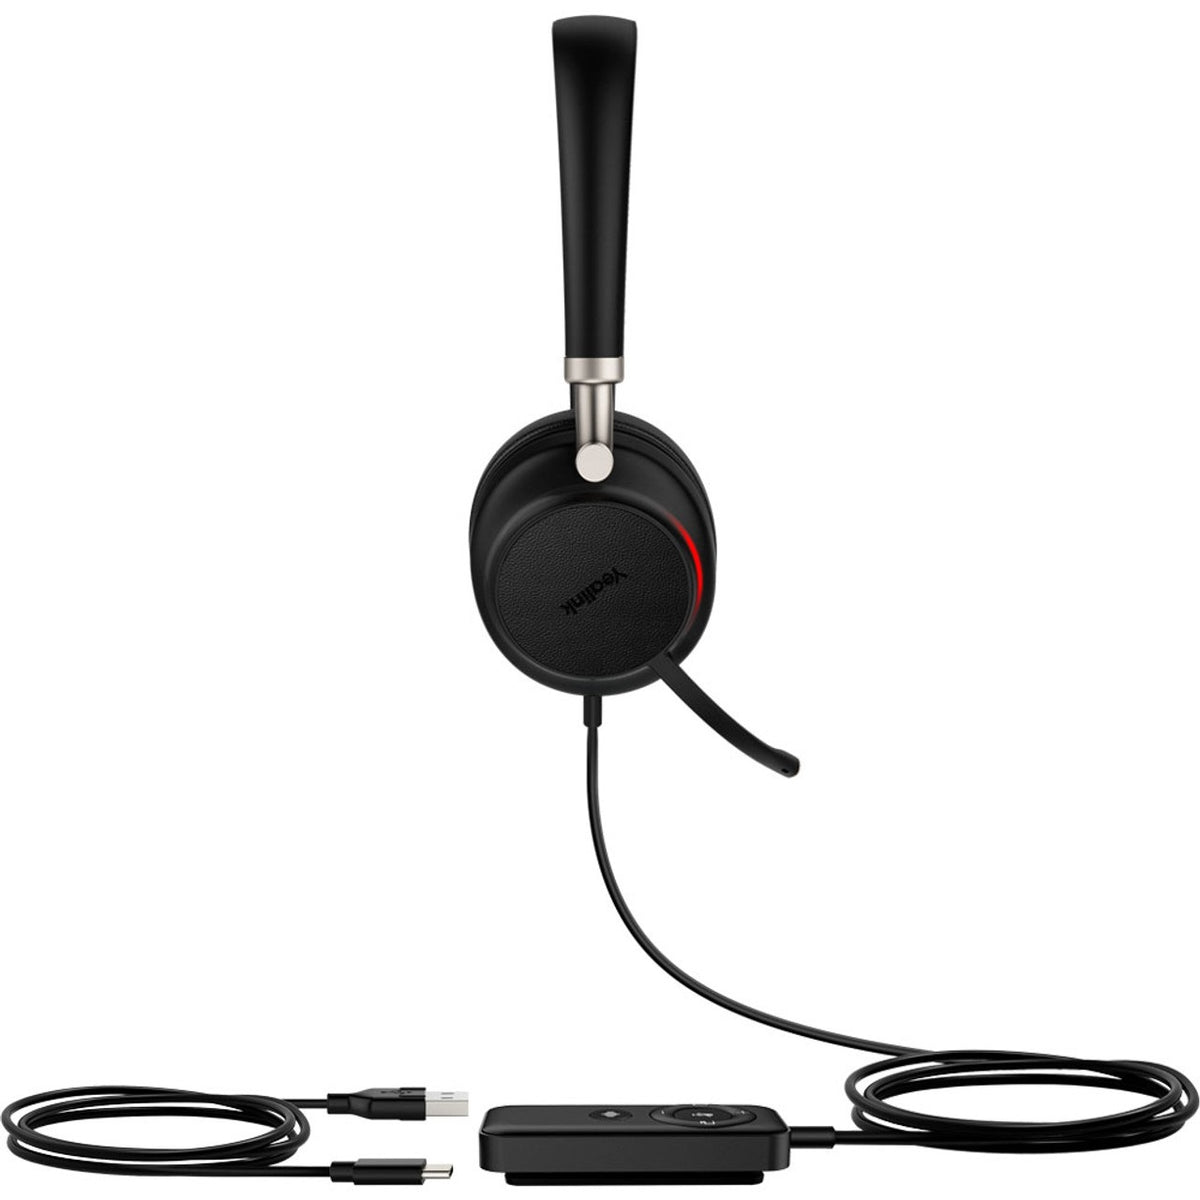 Yealink-UH38-Bluetooth-USB-Headset-Duo-UC-SIDE-VIEW